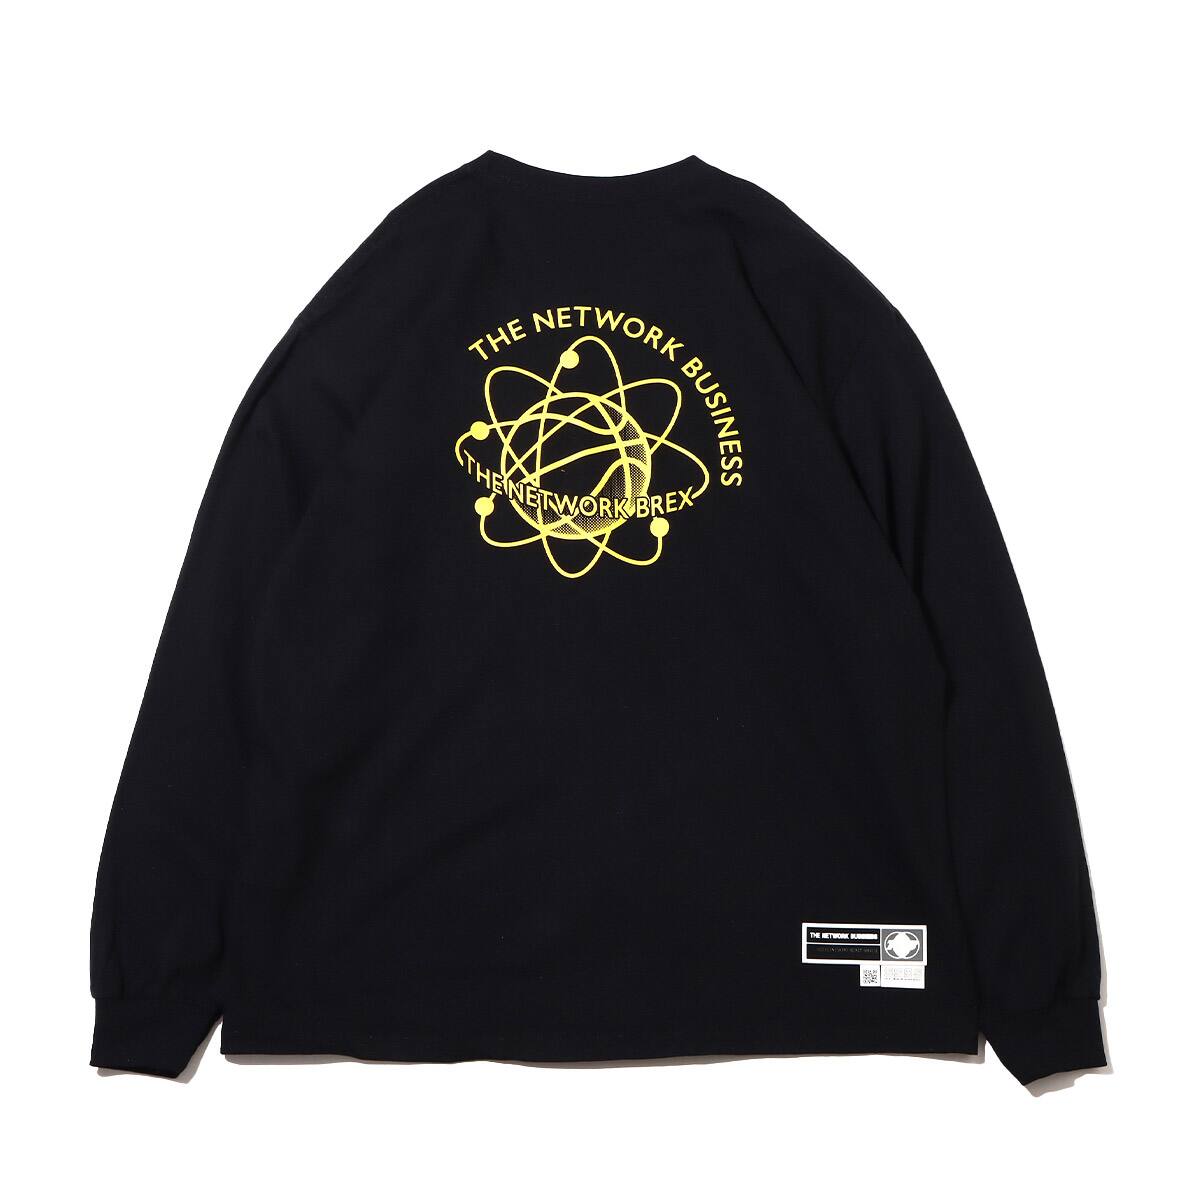 THE NETWORK BUSINESS × BREX WING FOOT L/S TEE BLACK 23SP-S